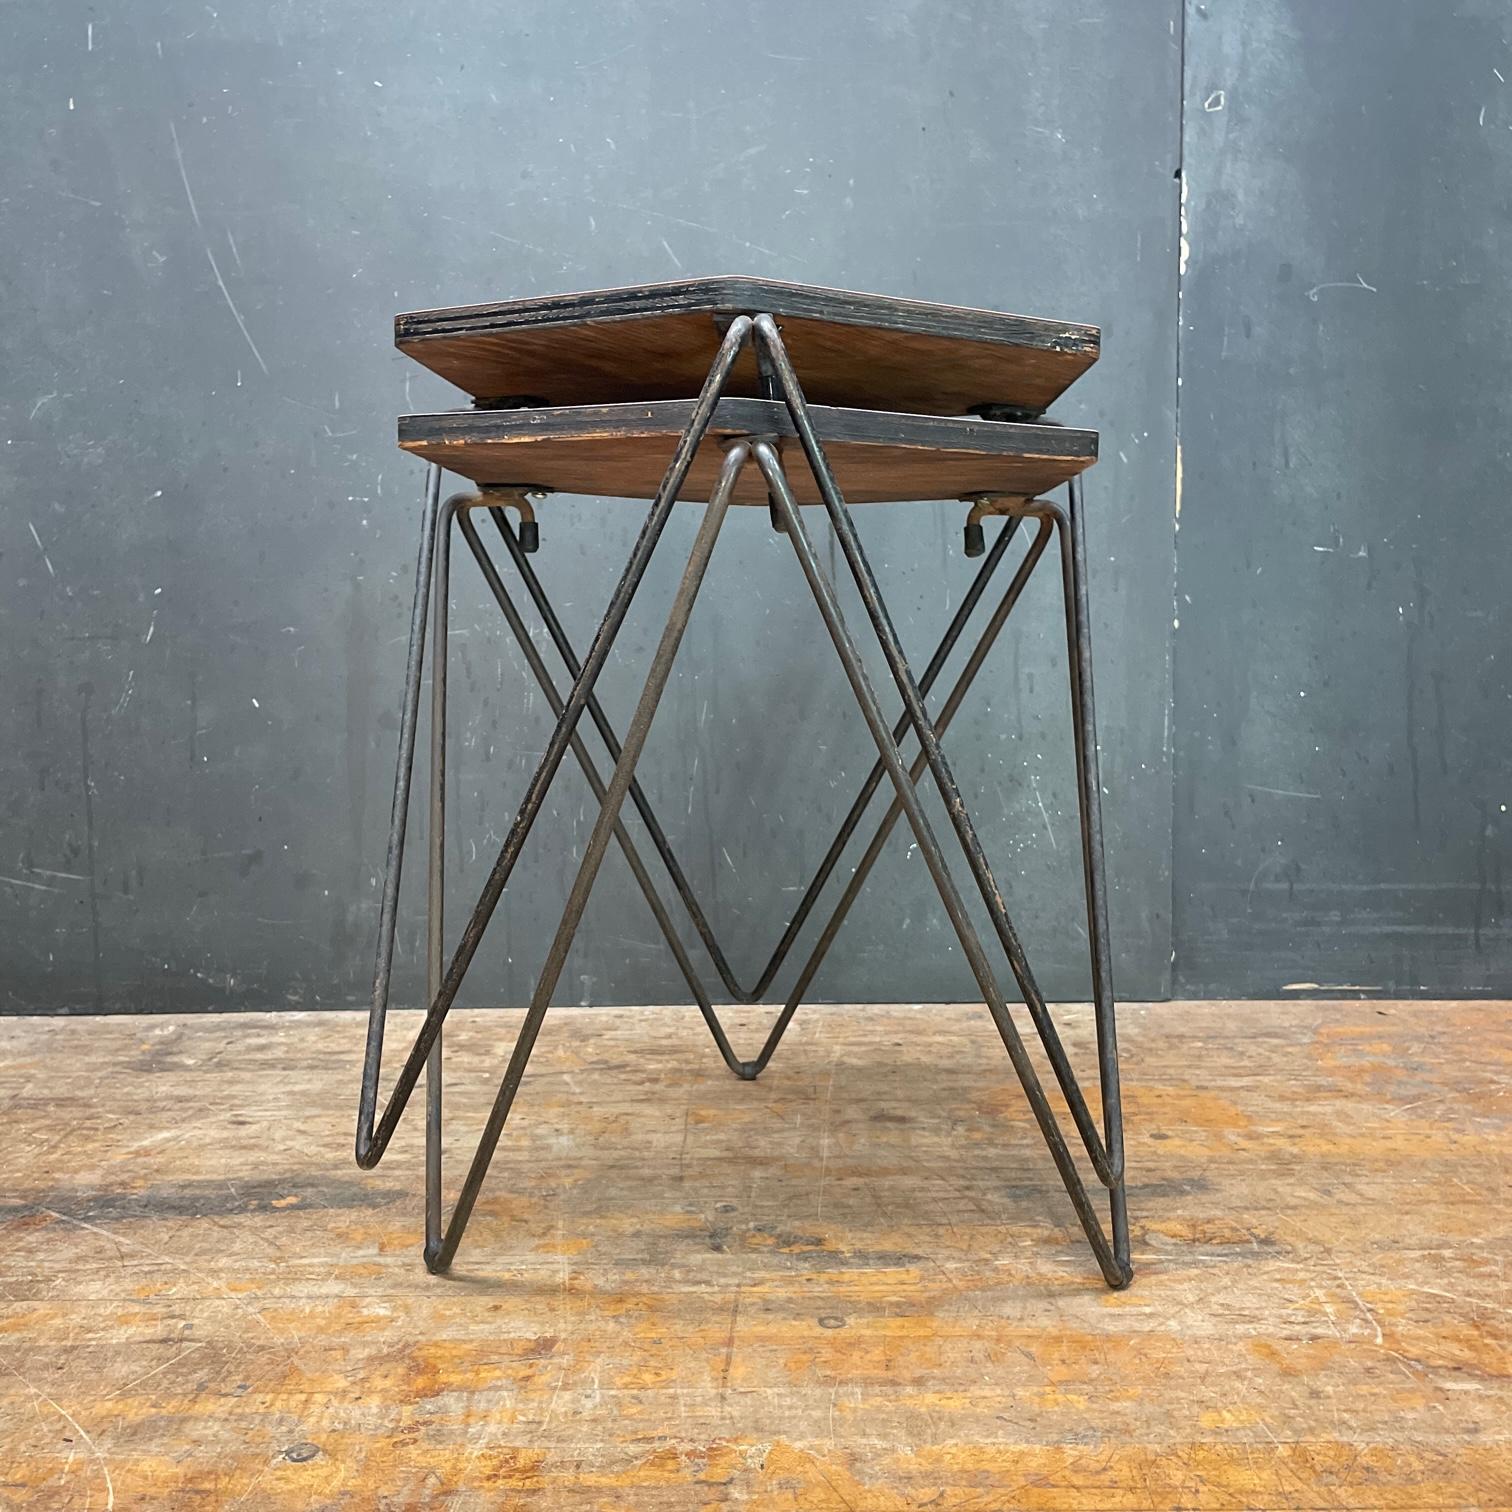 Steel 1950s Architects Prismatic Stacking Tables Pair Mid-Century Geometric Pedestal For Sale